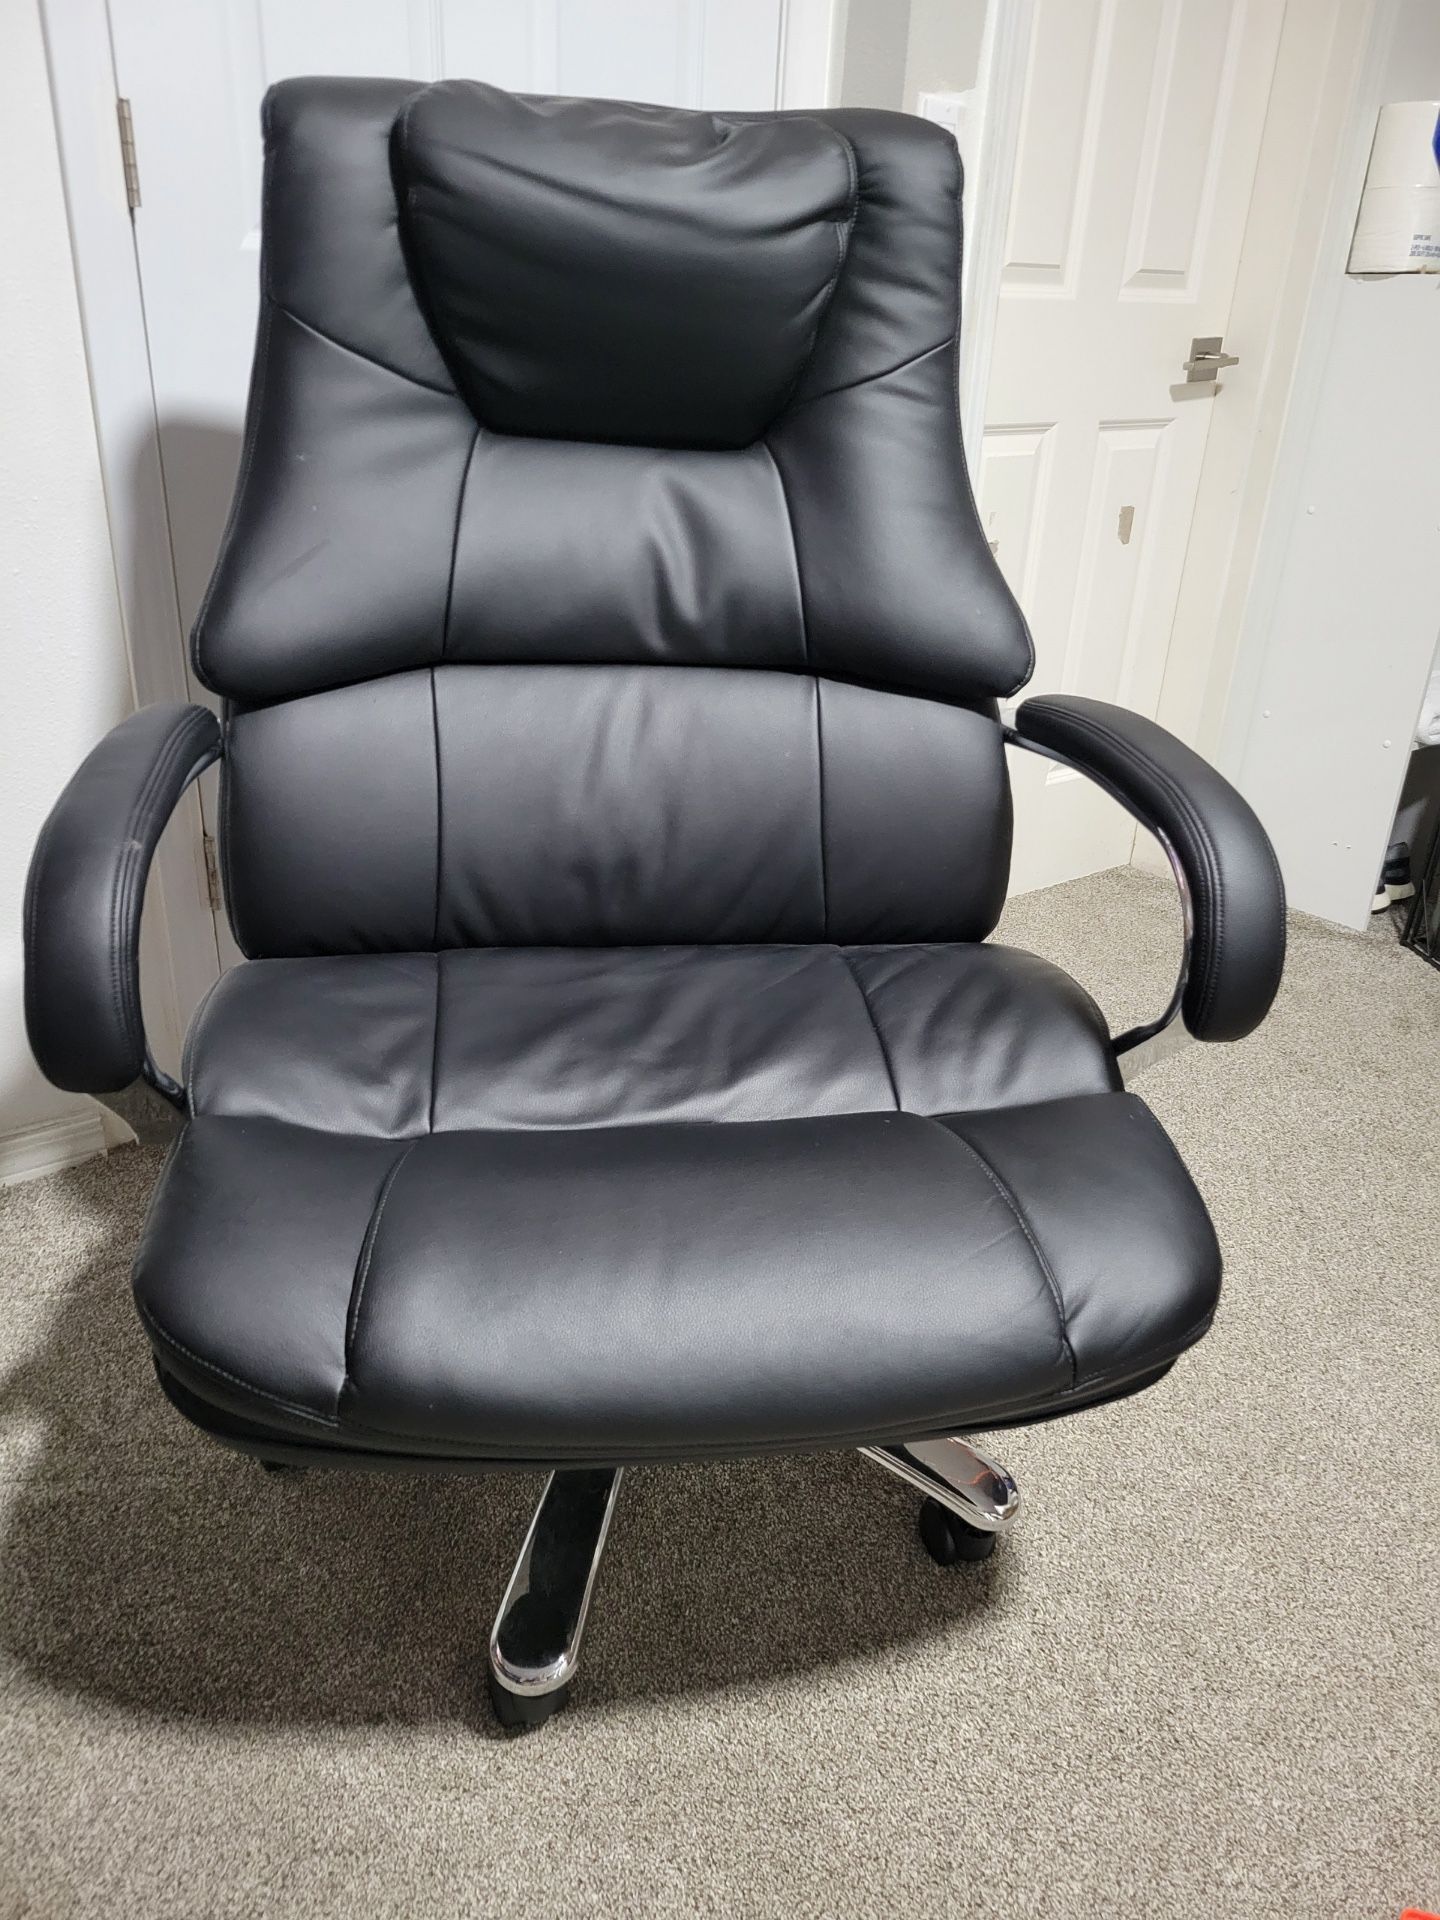 Oversized Office Chair 100 OBO 